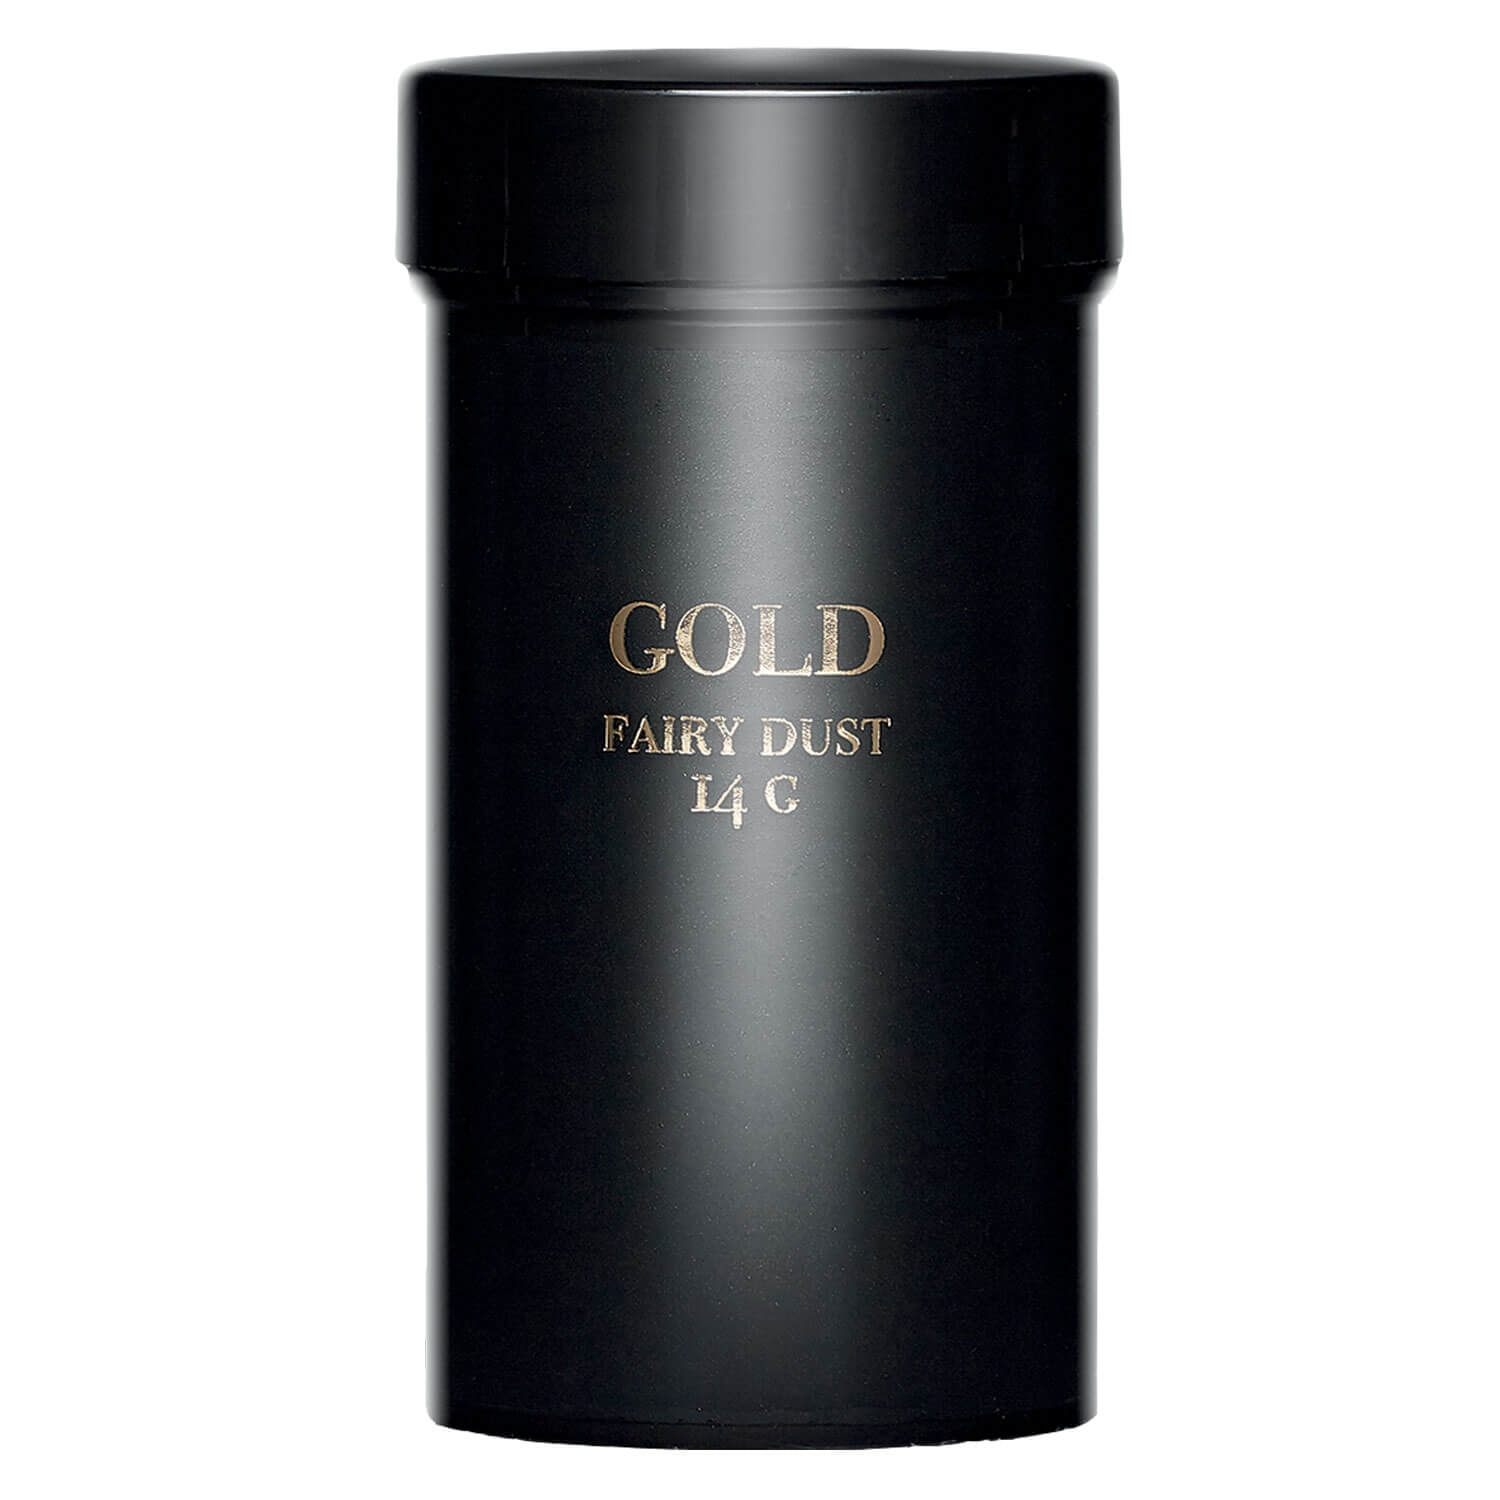 Product image from Gold - Fairy Dust